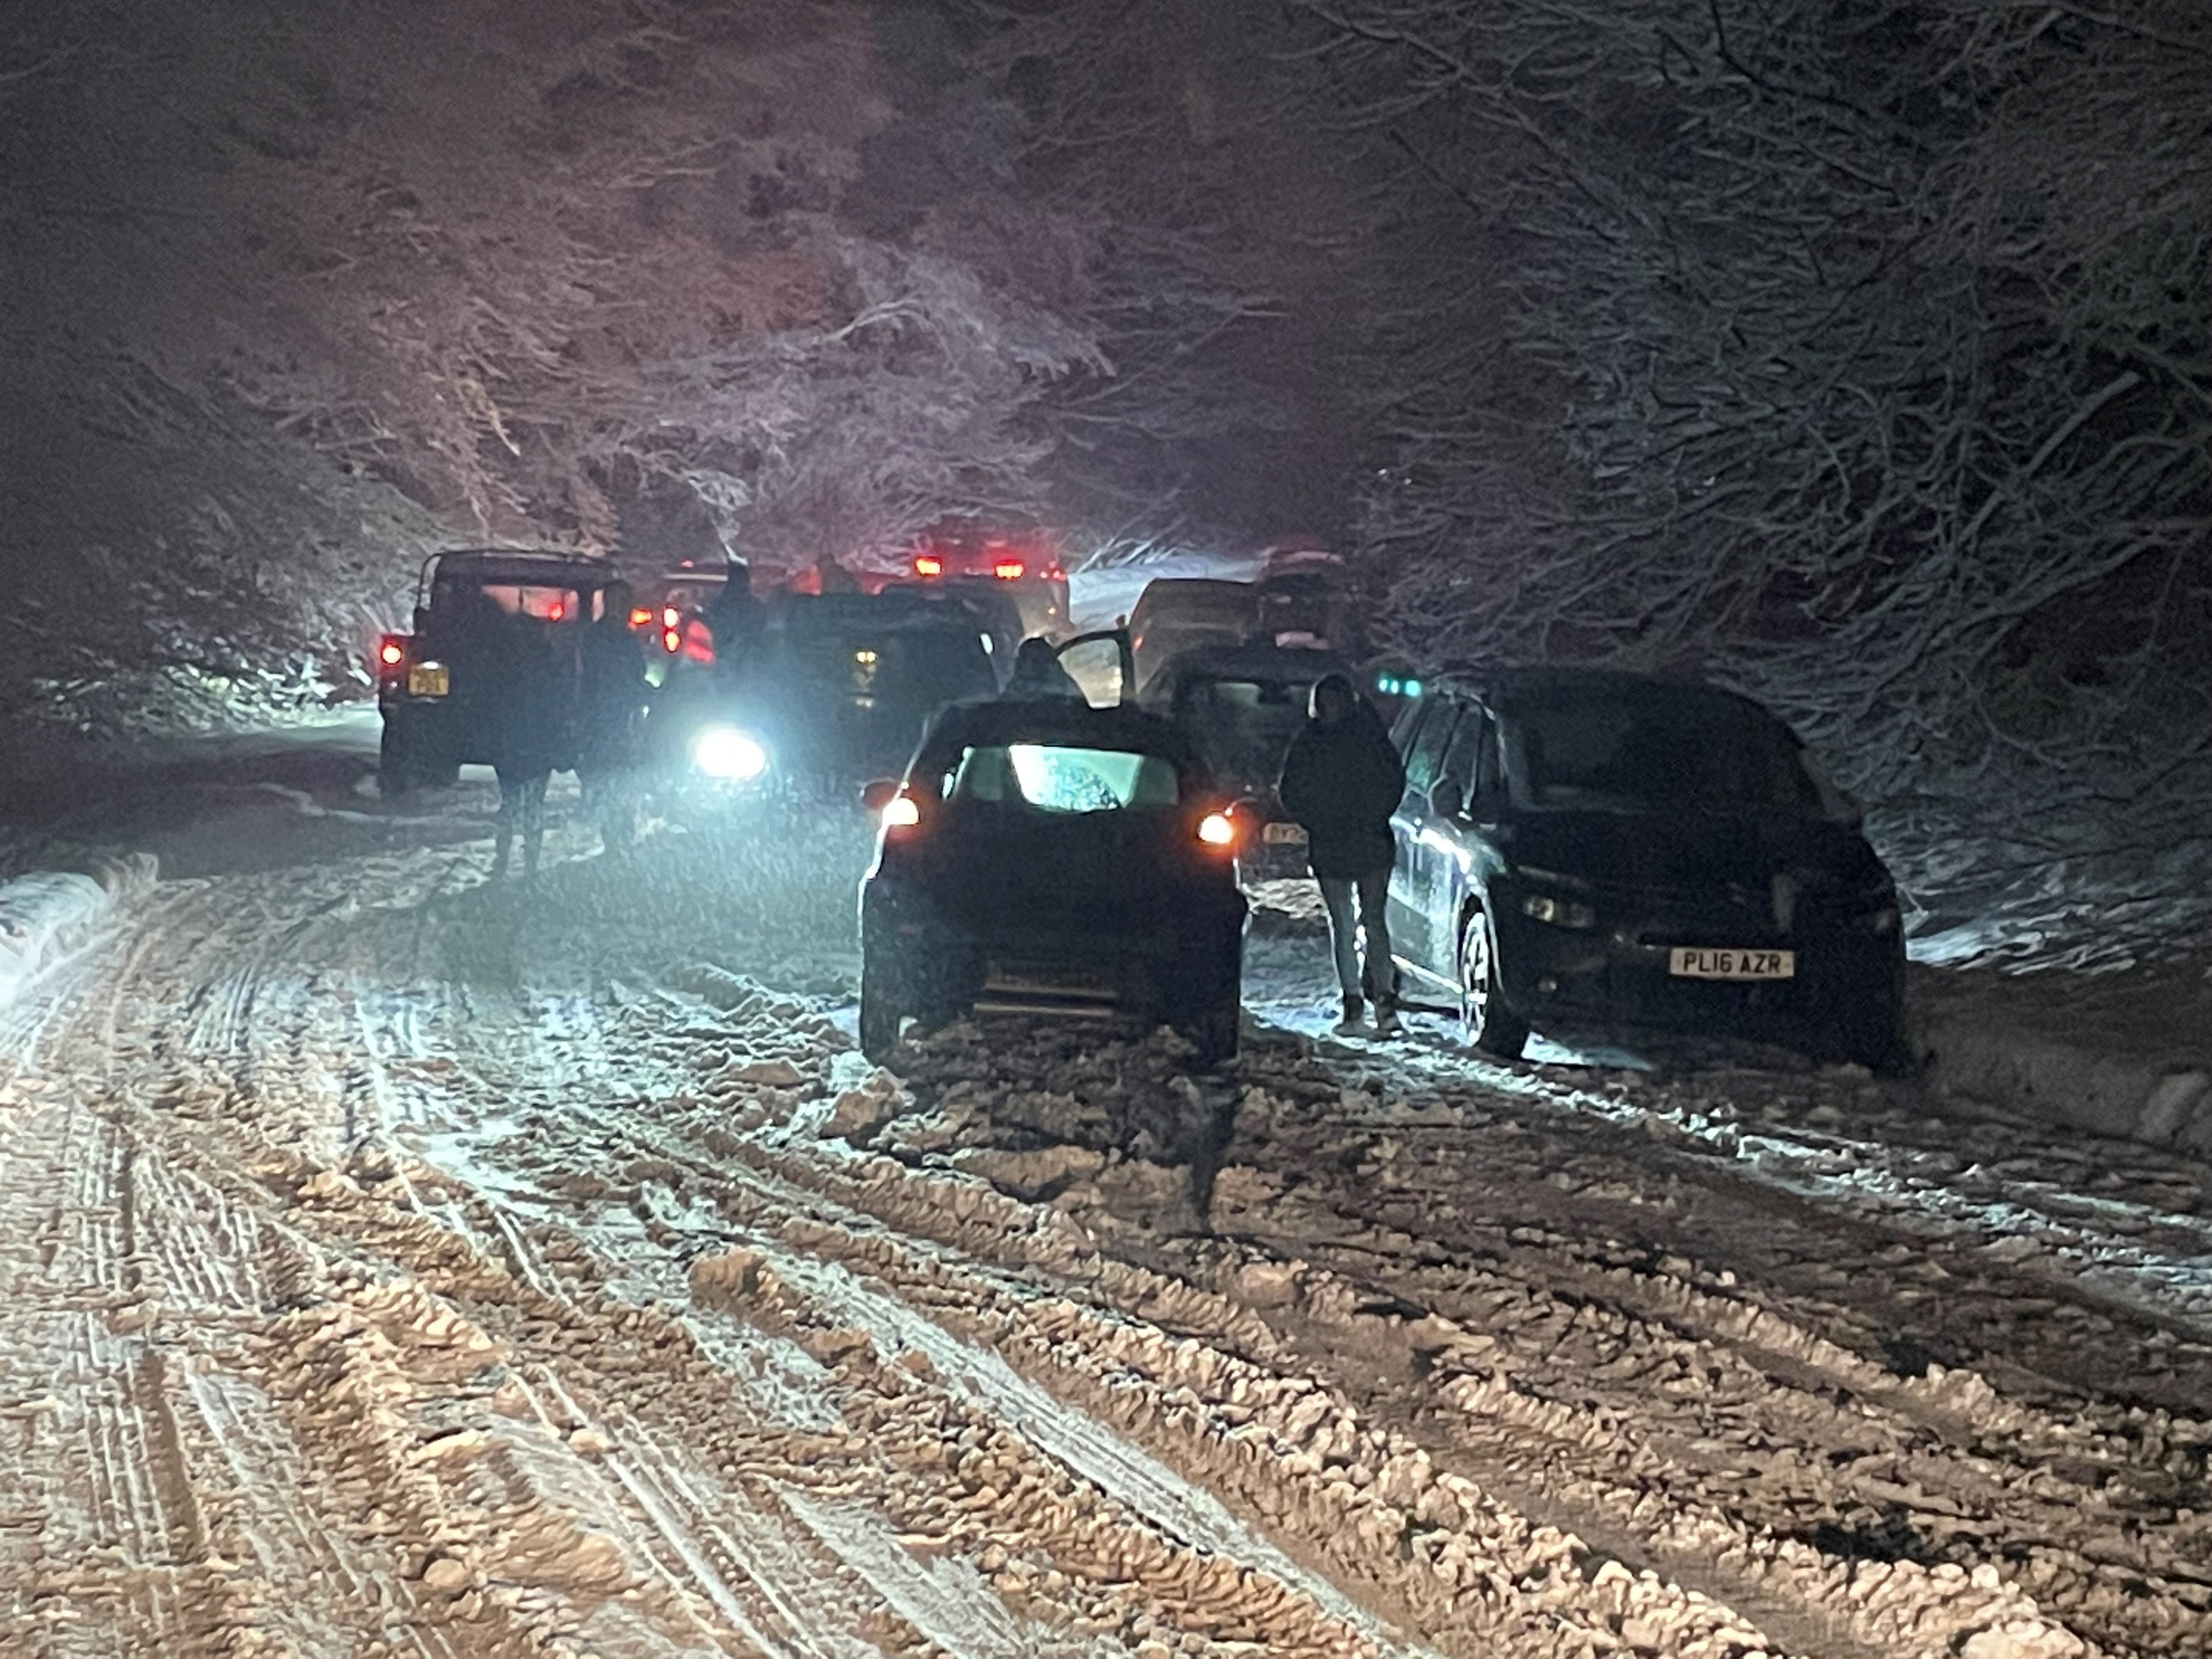 Treacherous conditions on the A22 yesterday near East Grinstead, West Sussex